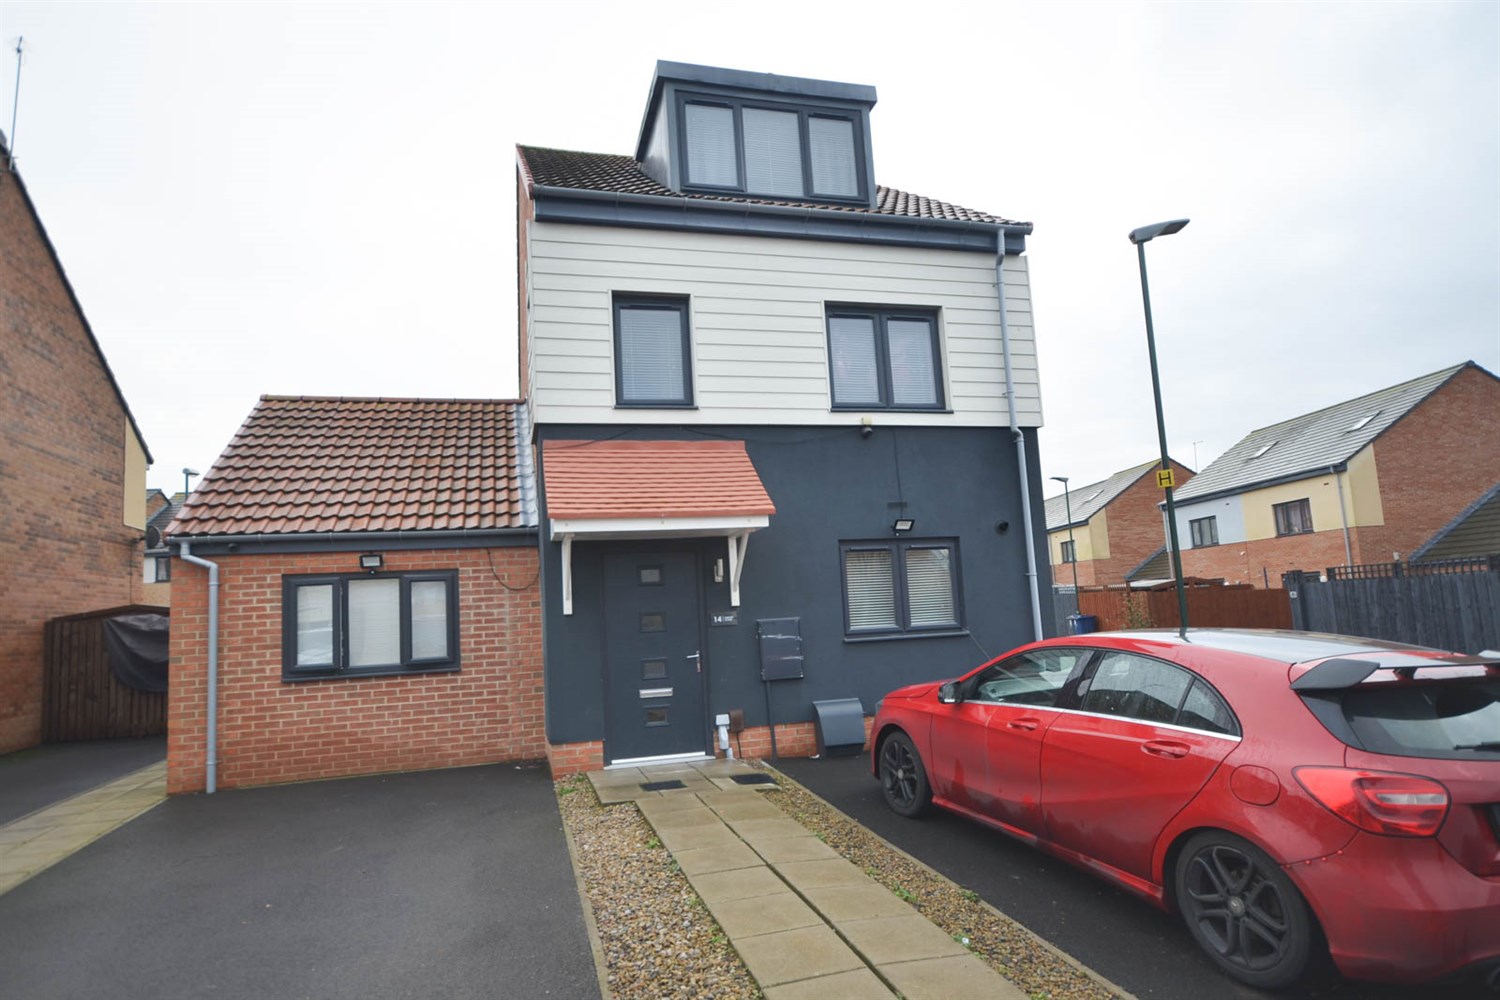 4 bed detached house for sale in Harvey Close, South Shields - Property Image 1